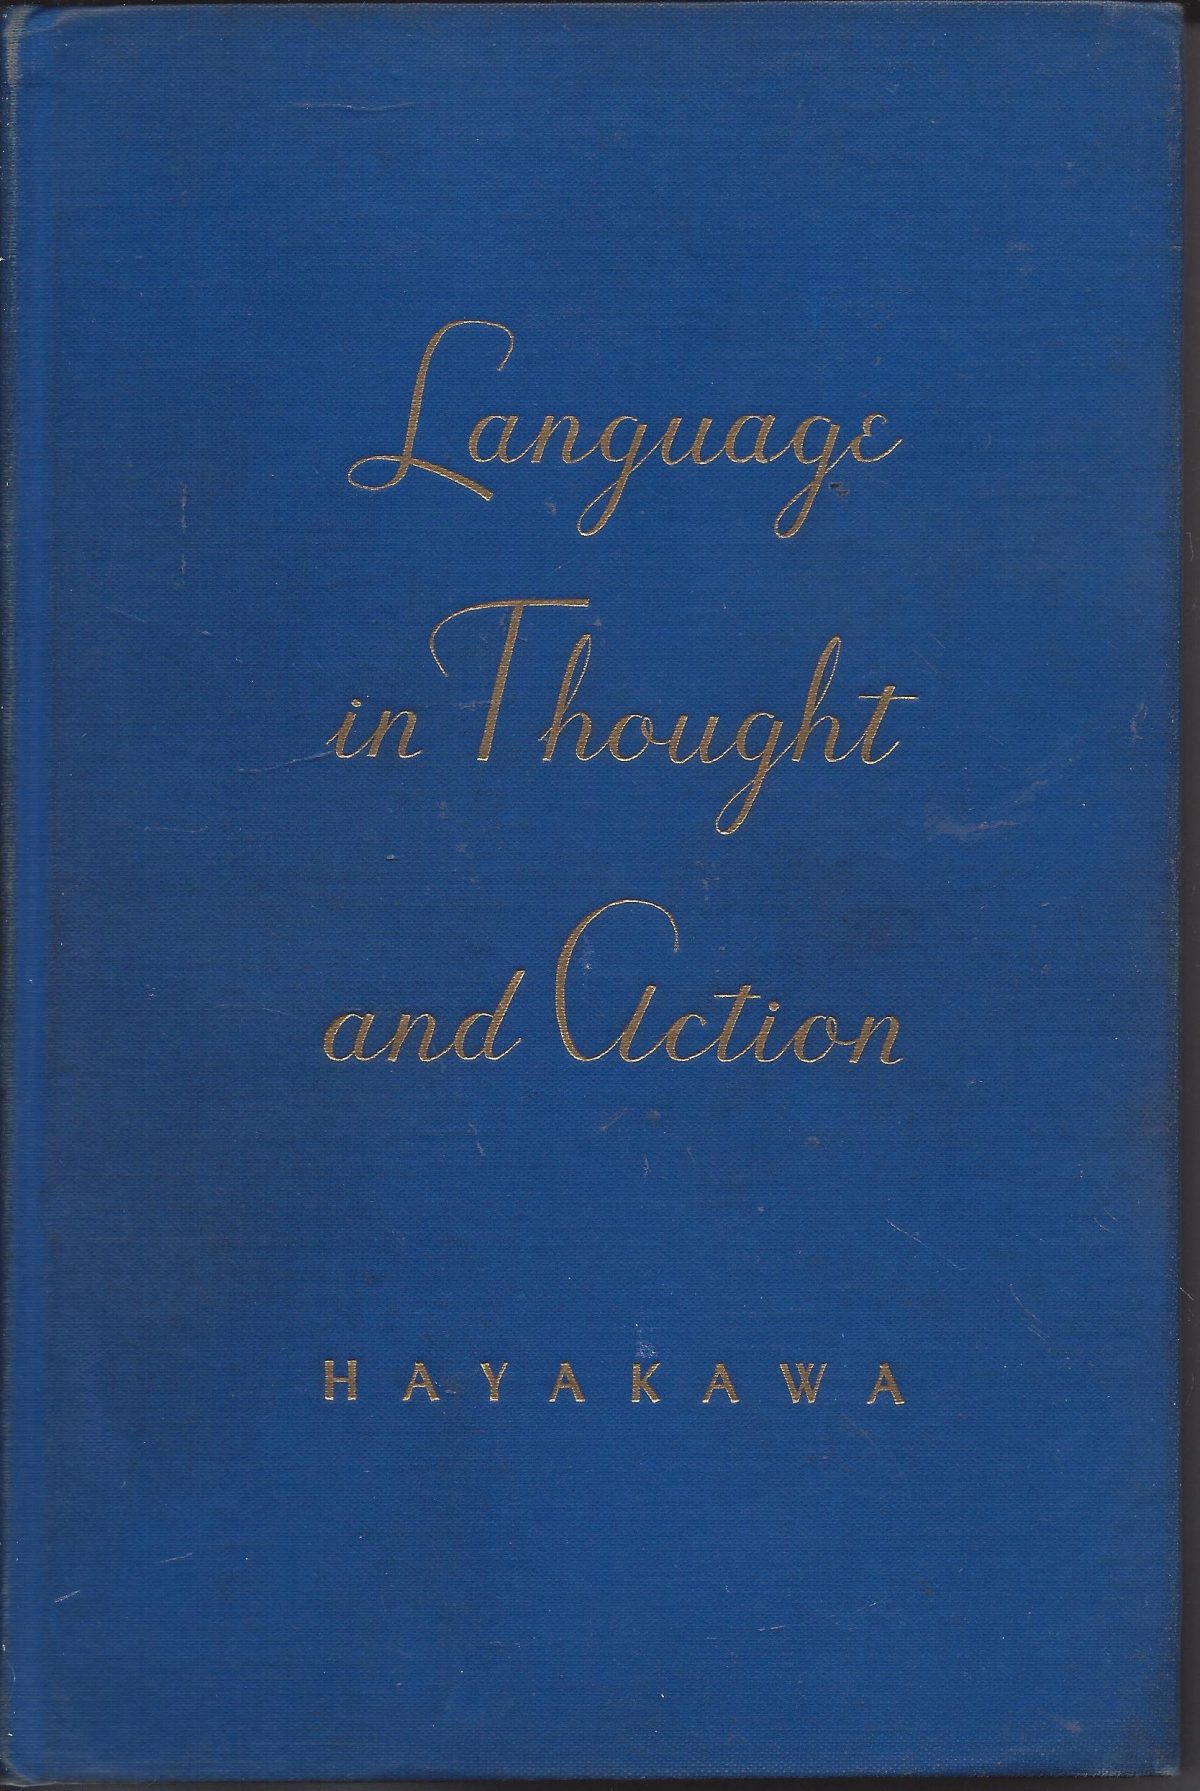 Language in Thought and Action by S.I. Hayakawa